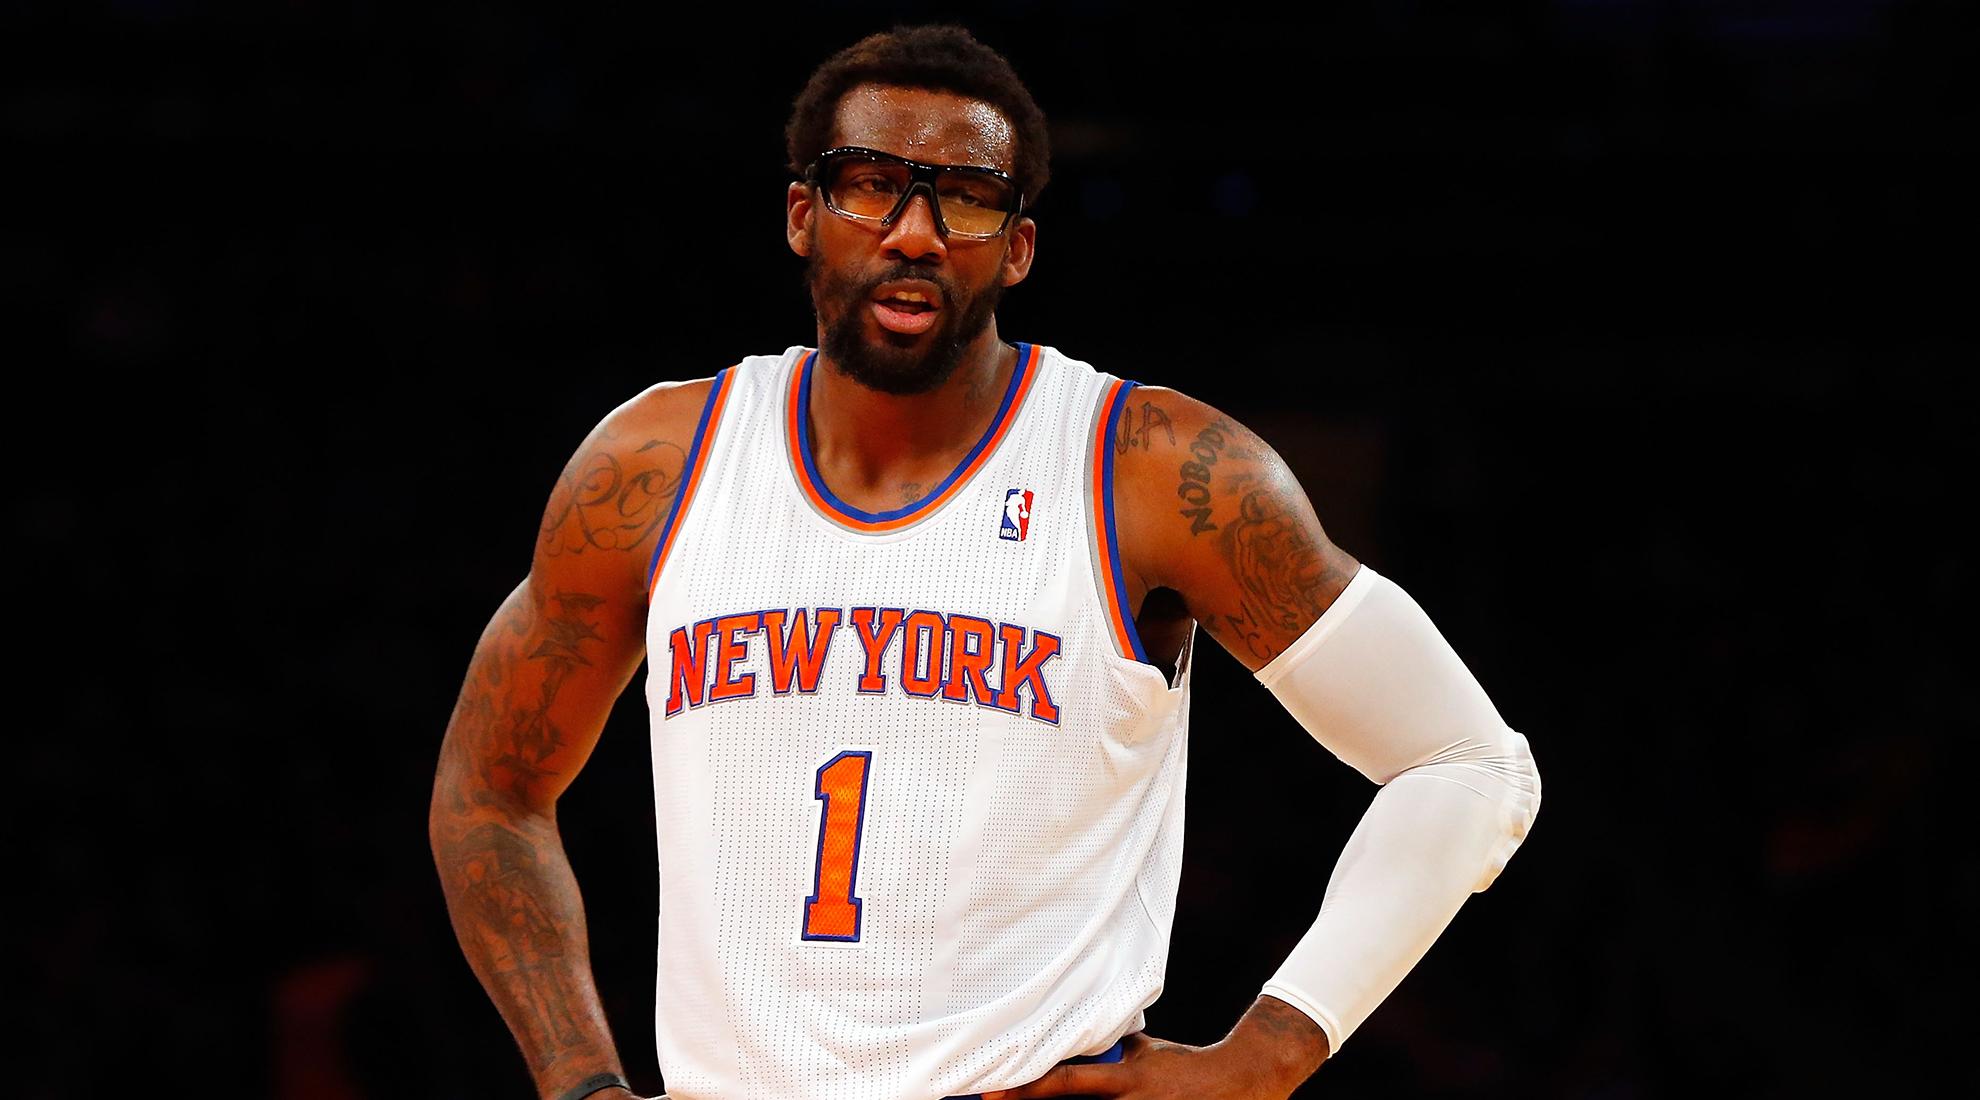 Amar'e Stoudemire's career was great but brief. Sports on Earth